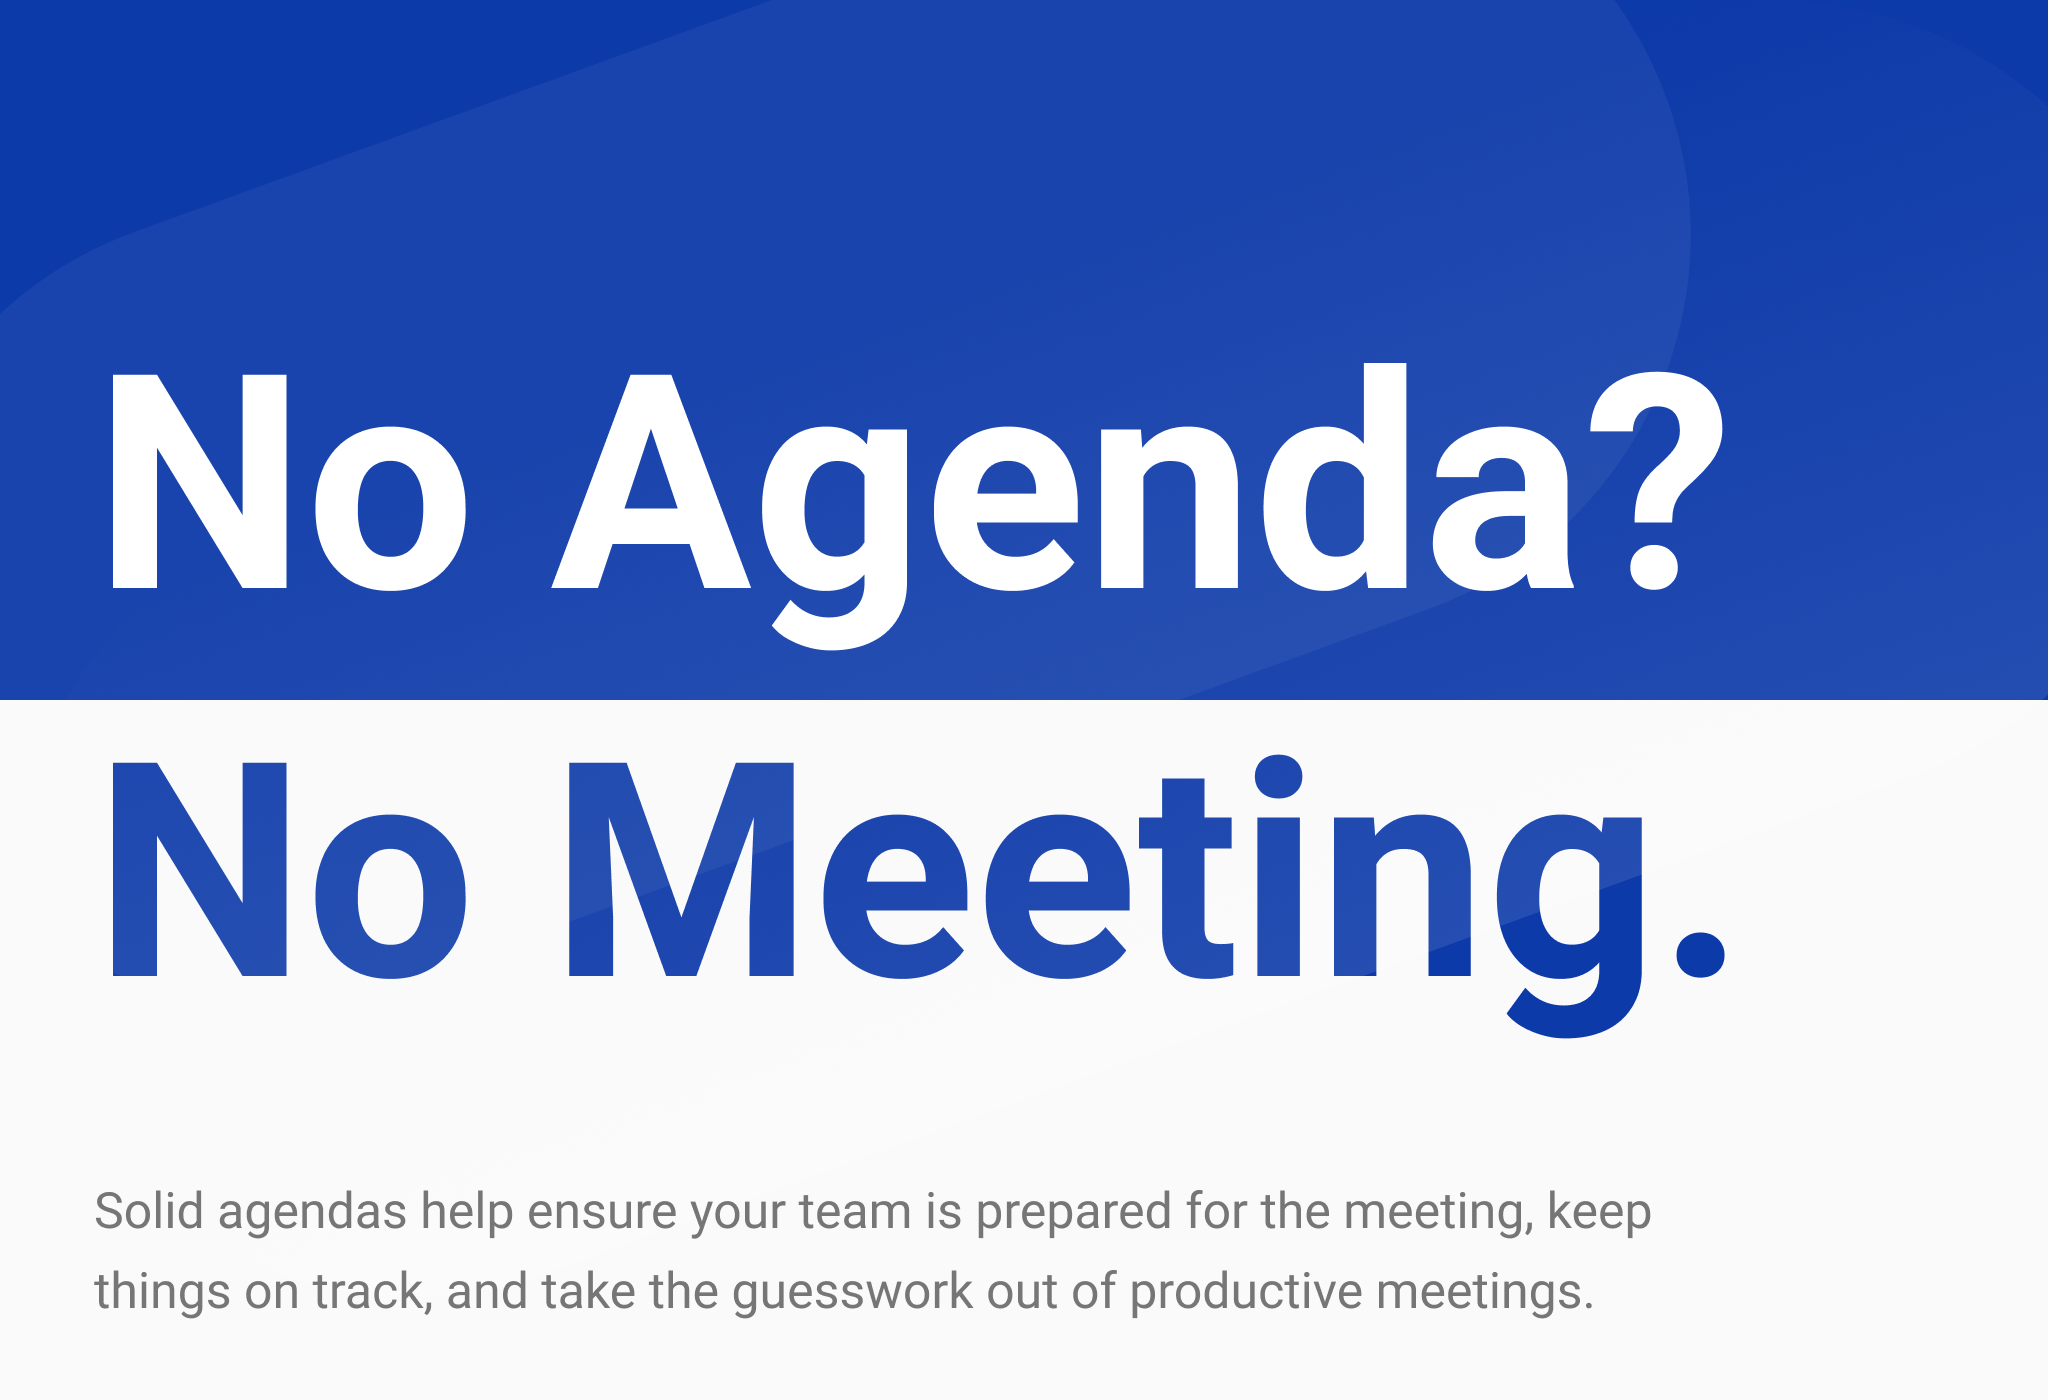 Your Pre-Meeting Checklist (Free Templates)